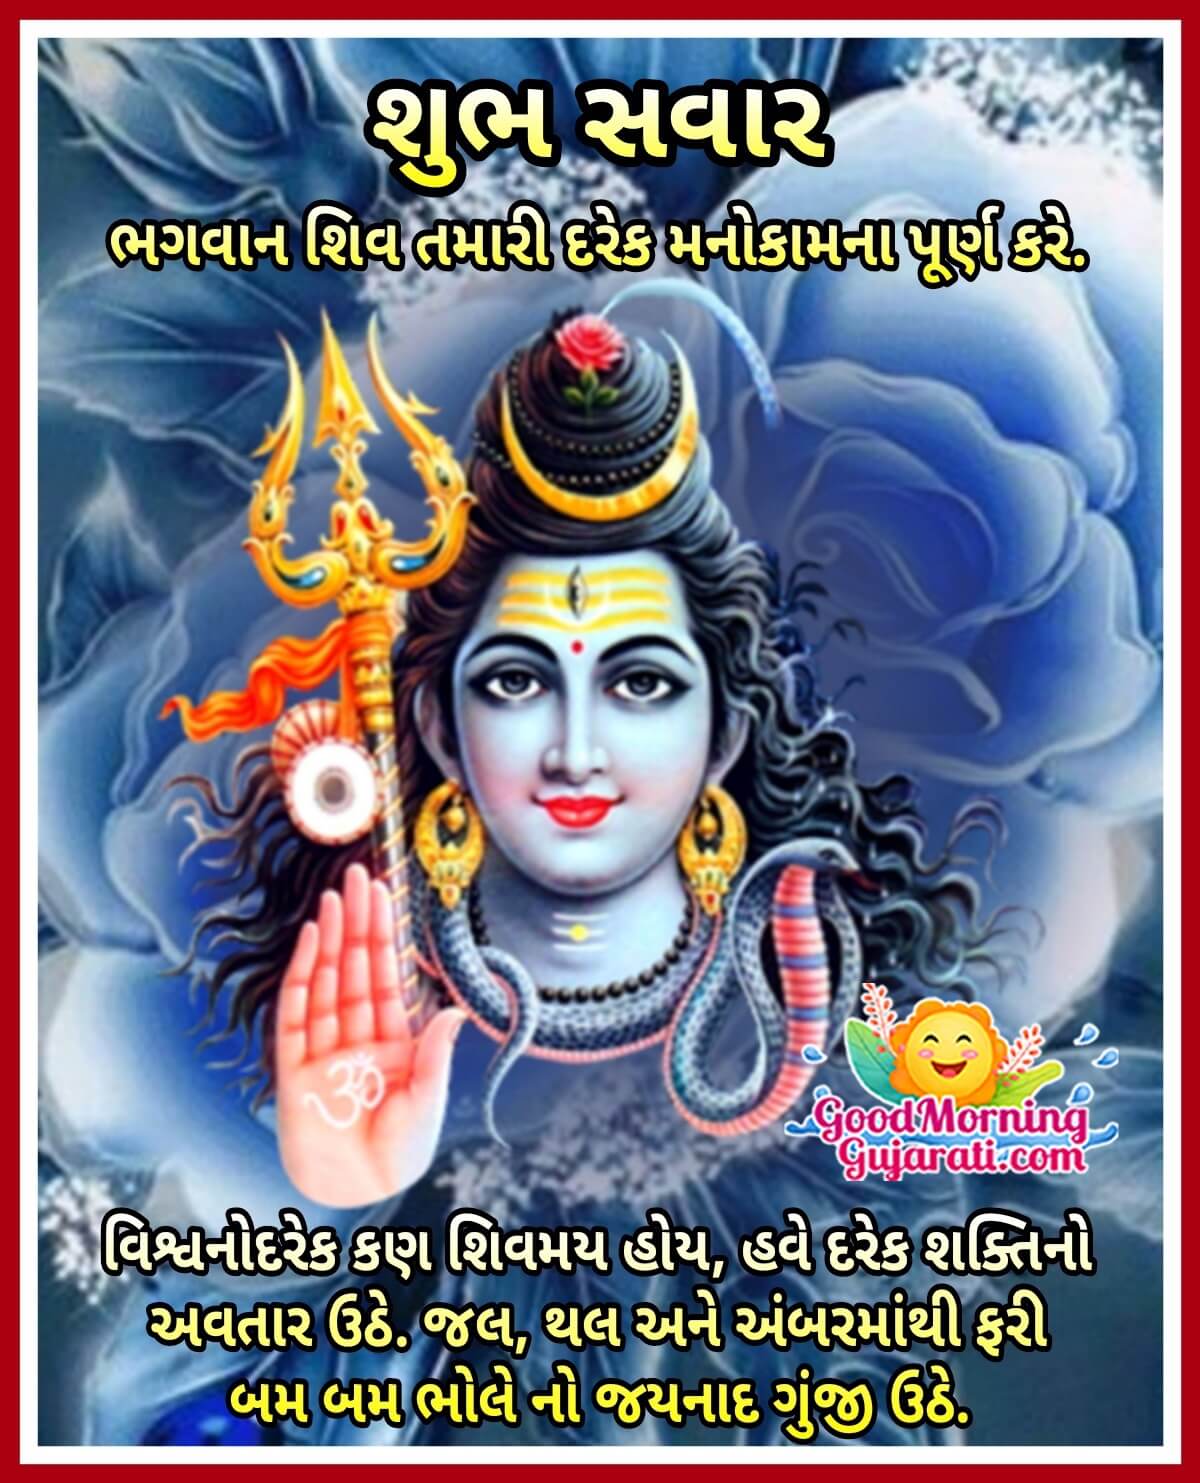 Good Morning Gujarati Religious - Good Morning Wishes & Images in ...